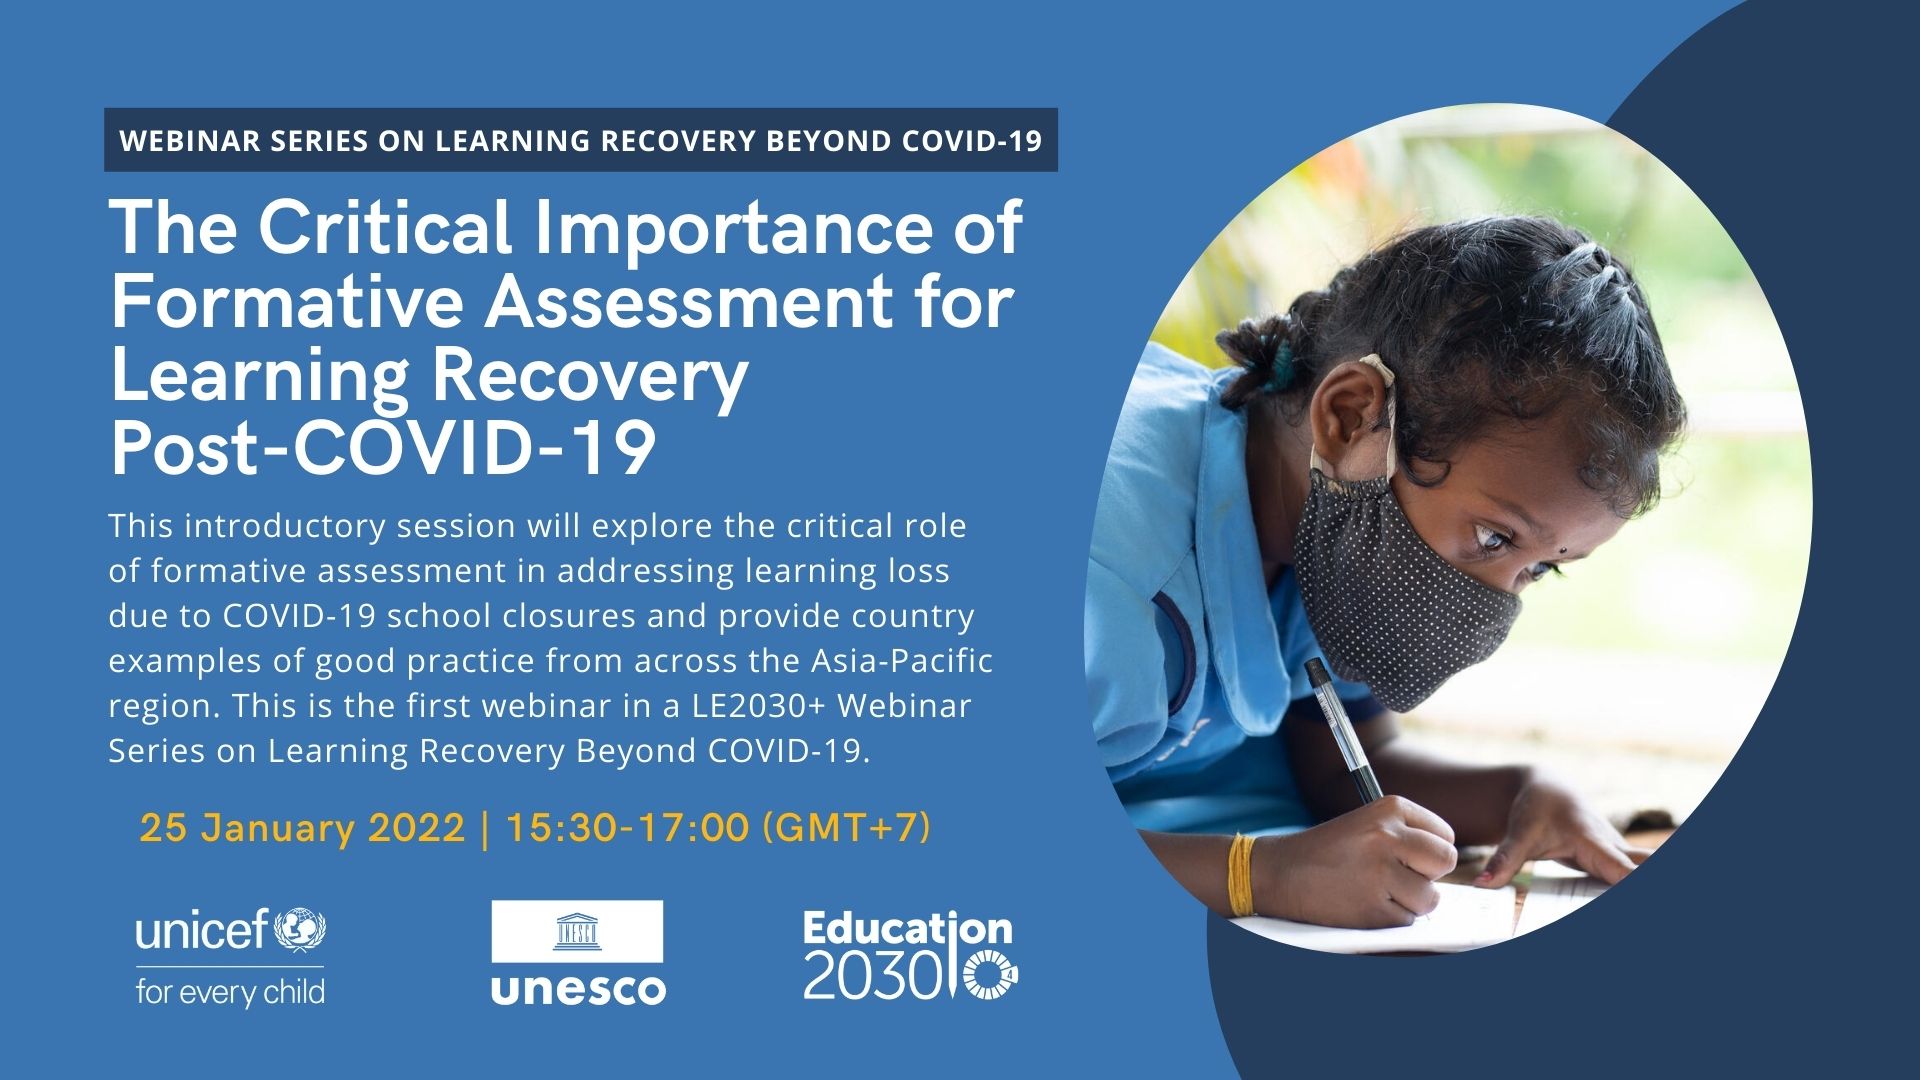 UNICEF-UNESCO joint webinar series on Learning Recovery Beyond COVID-19